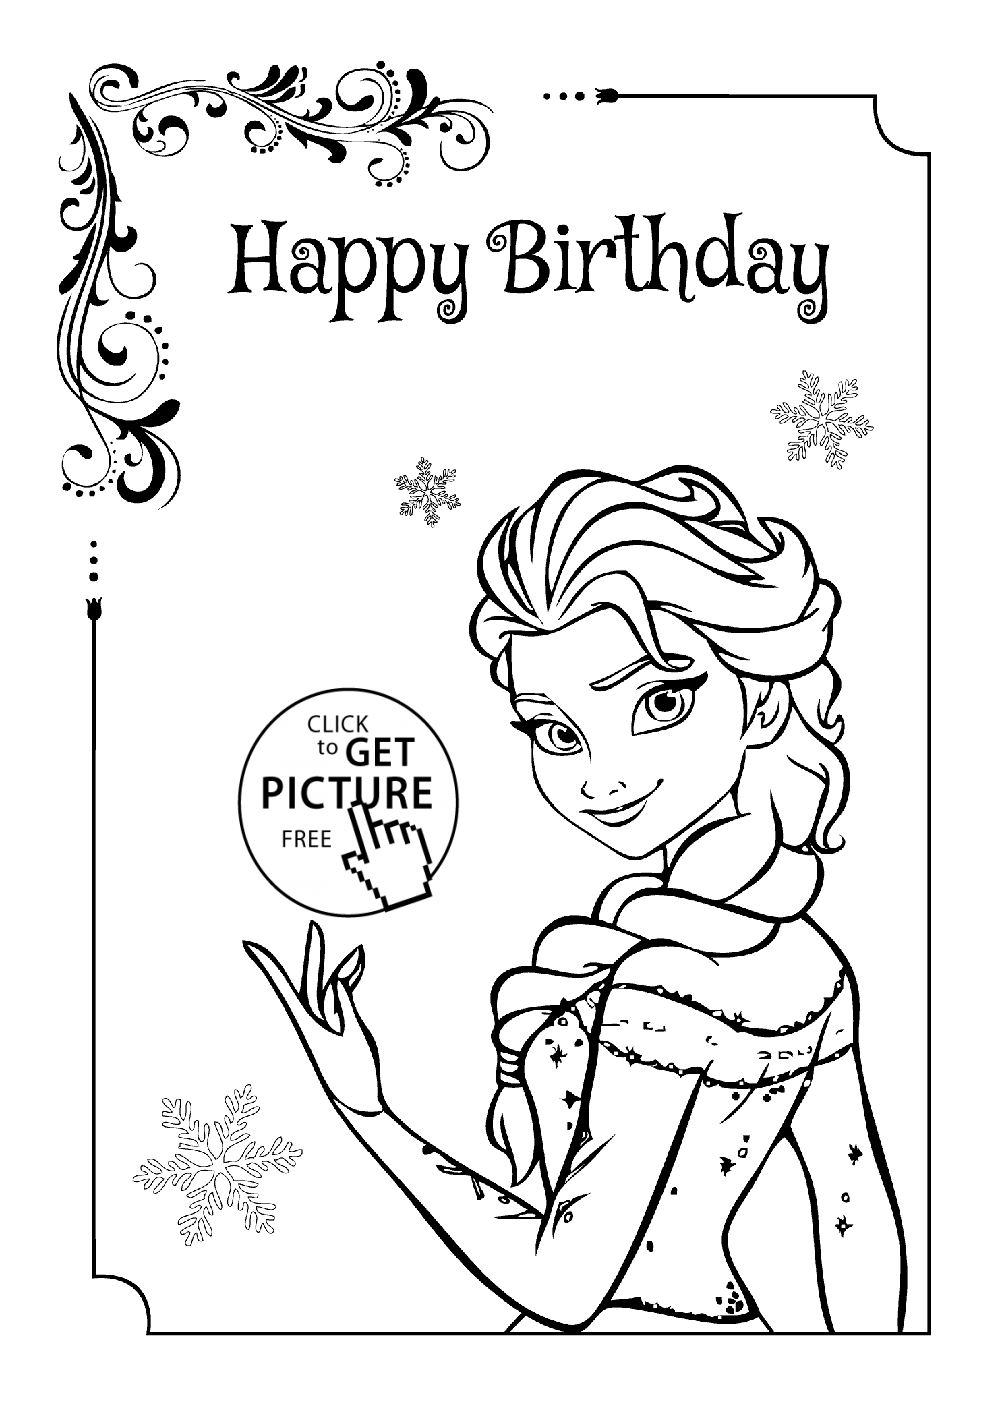 Personalized Happy Birthday Coloring Pages at GetColorings.com | Free ...